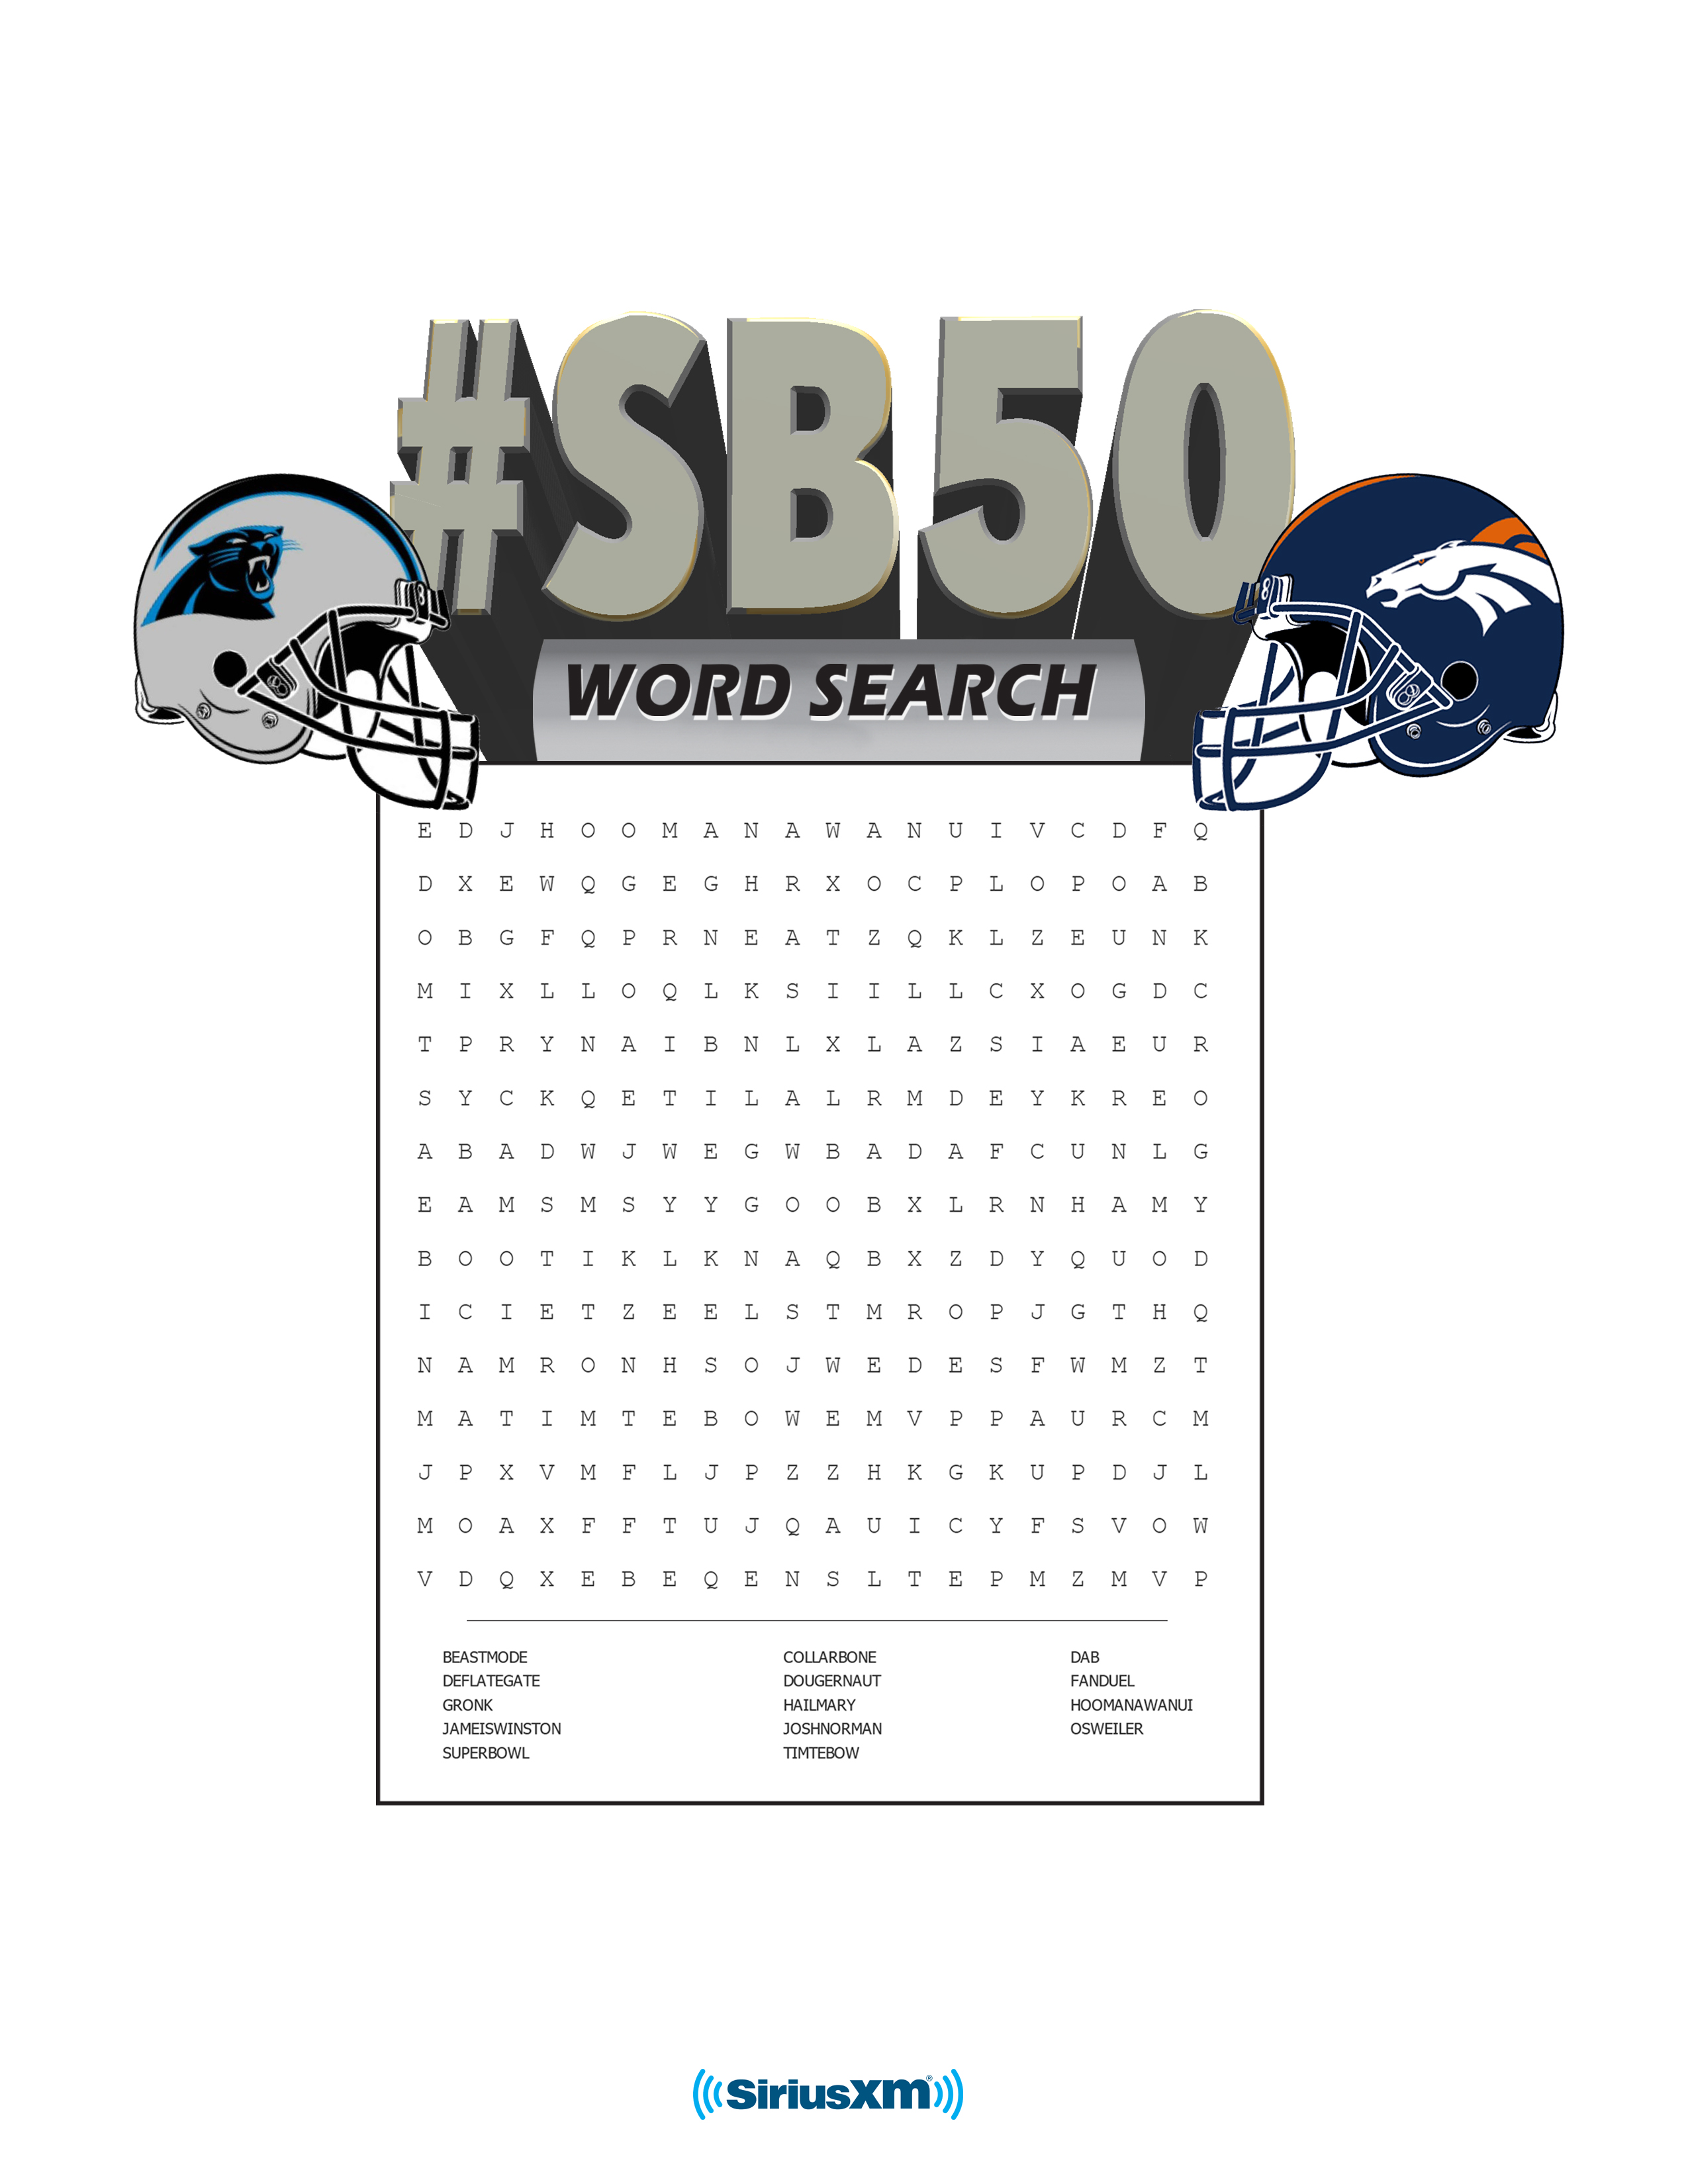 Super Bowl word search